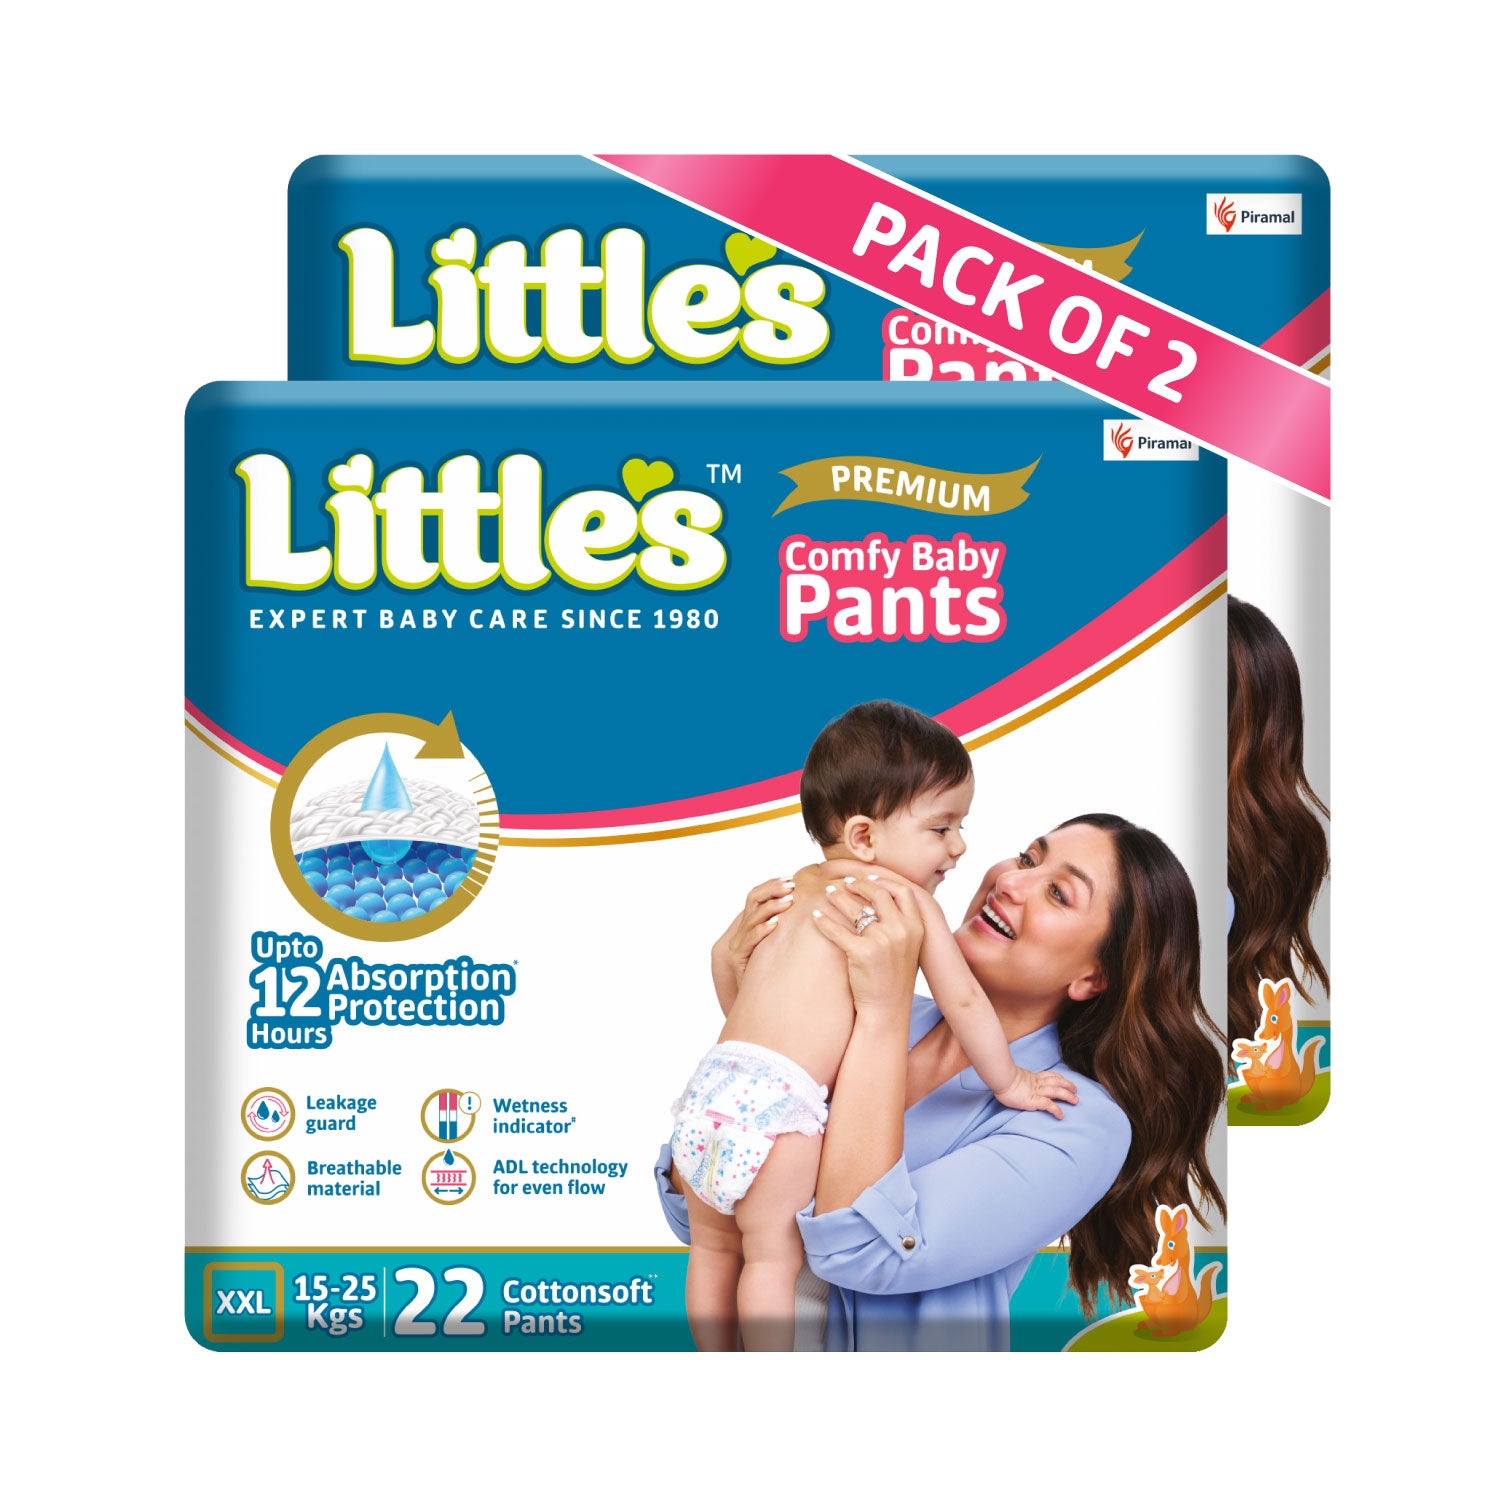 Little's Baby Pants Diapers with Wetness Indicator & 12 Hours Absorption, cottonsoft pants diaper XXL pack of 2